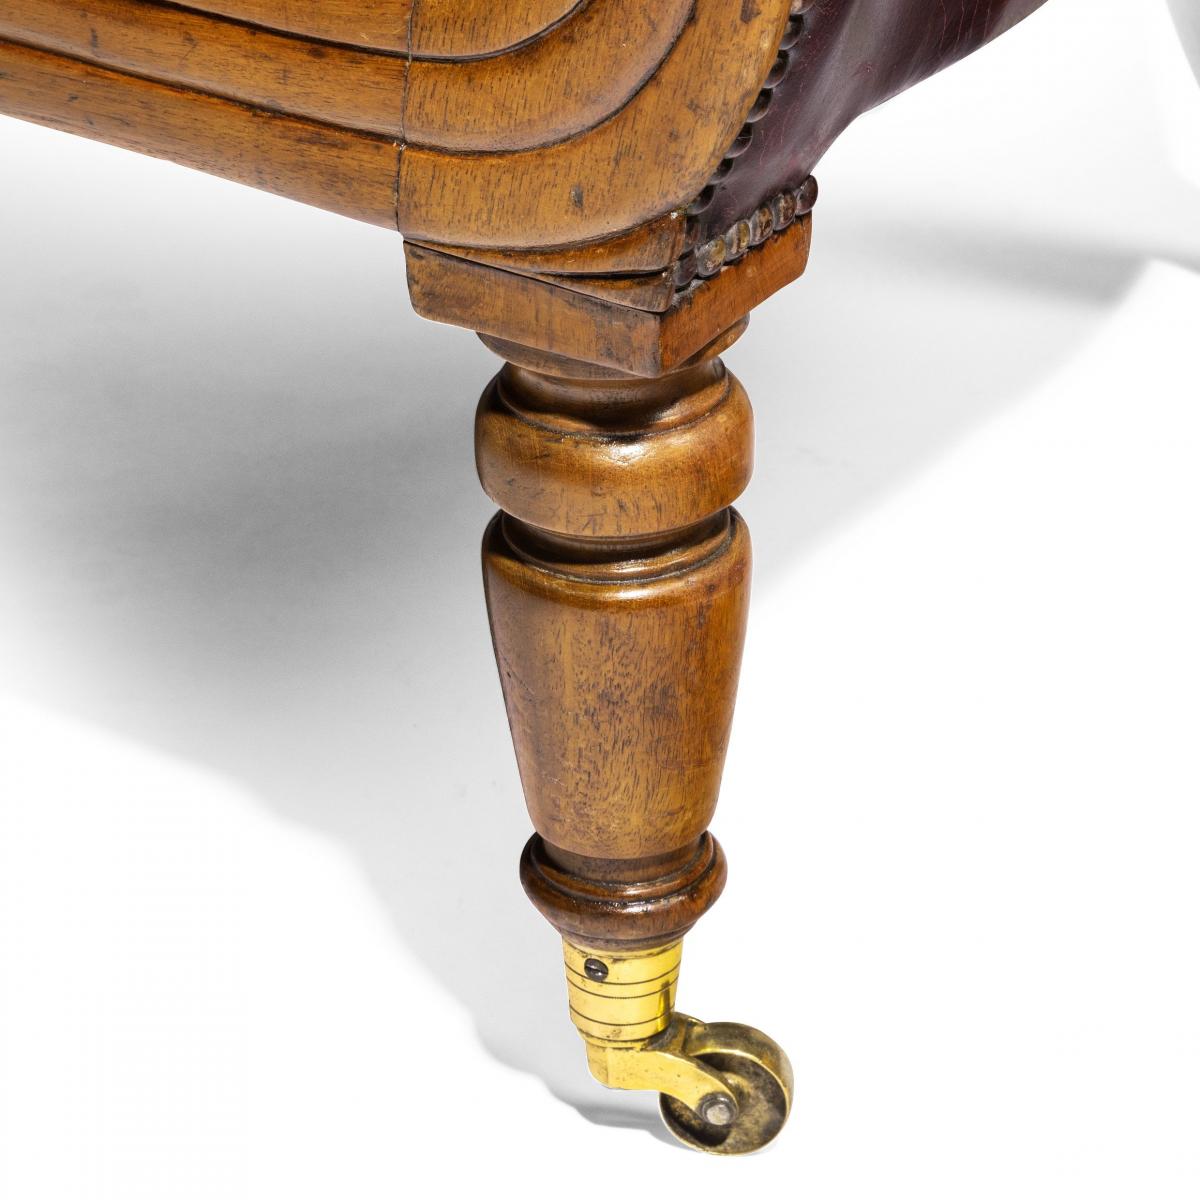 A William IV shaped mahogany library chair